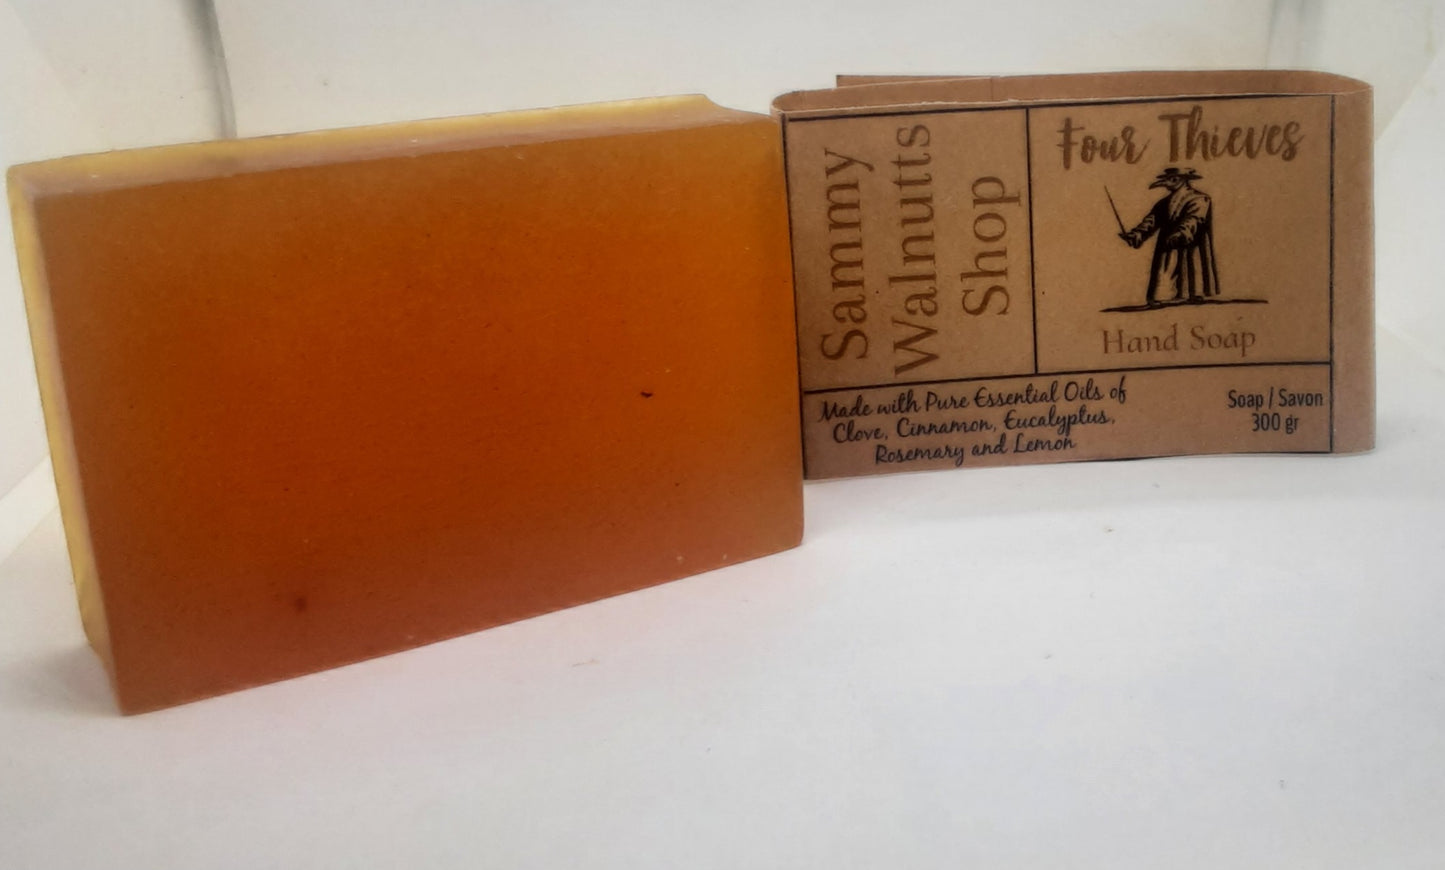 Legend of the Four Thieves Bar Soap